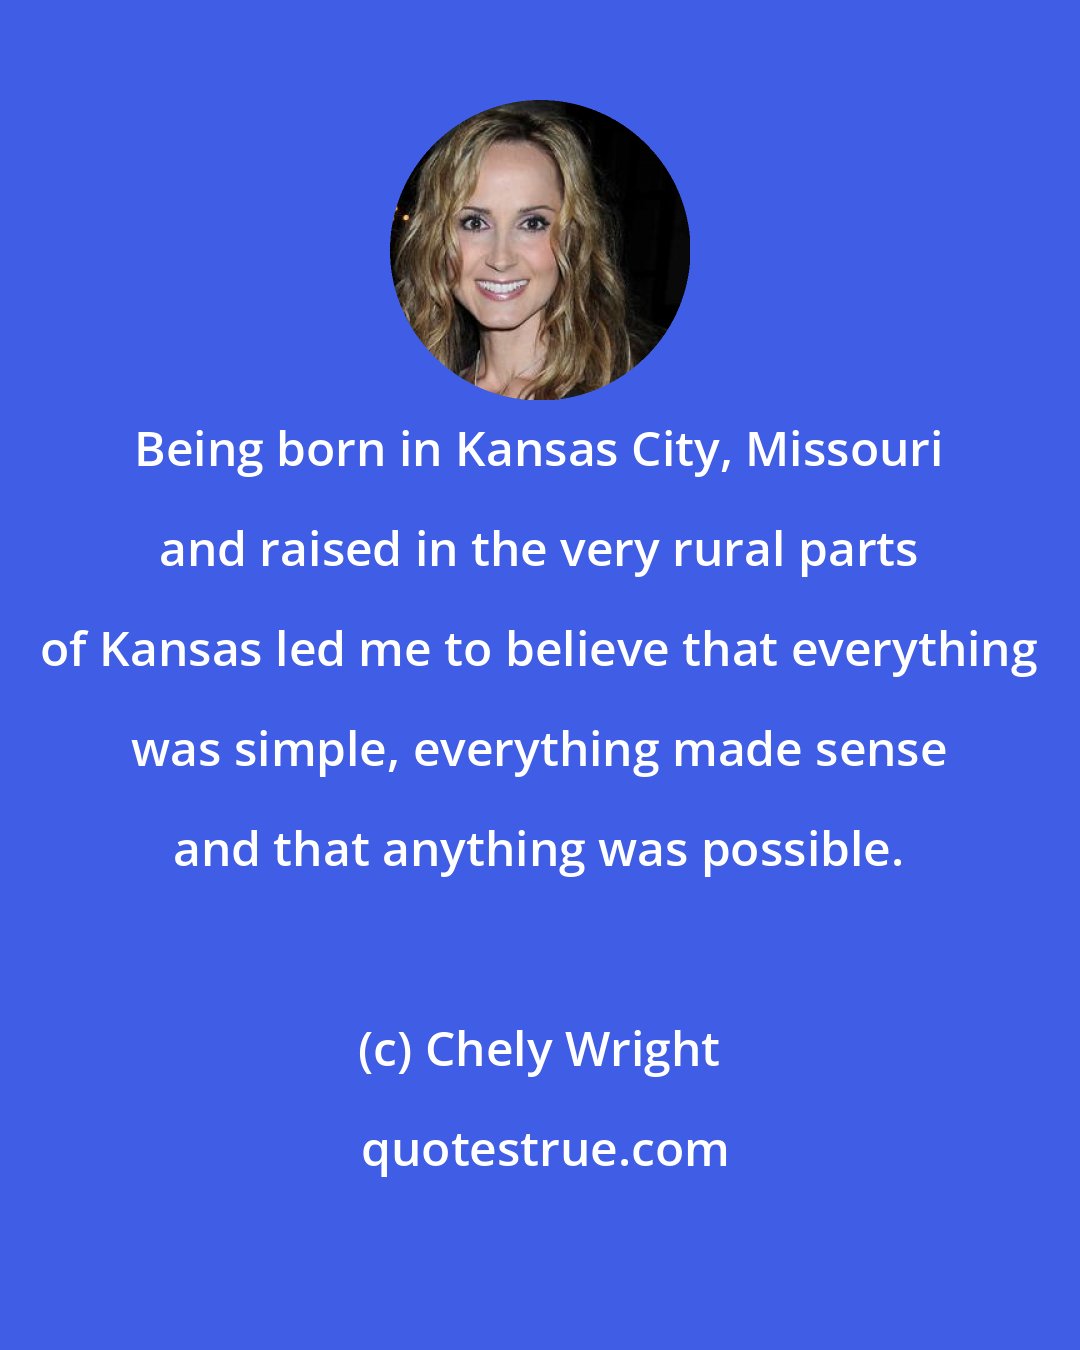 Chely Wright: Being born in Kansas City, Missouri and raised in the very rural parts of Kansas led me to believe that everything was simple, everything made sense and that anything was possible.